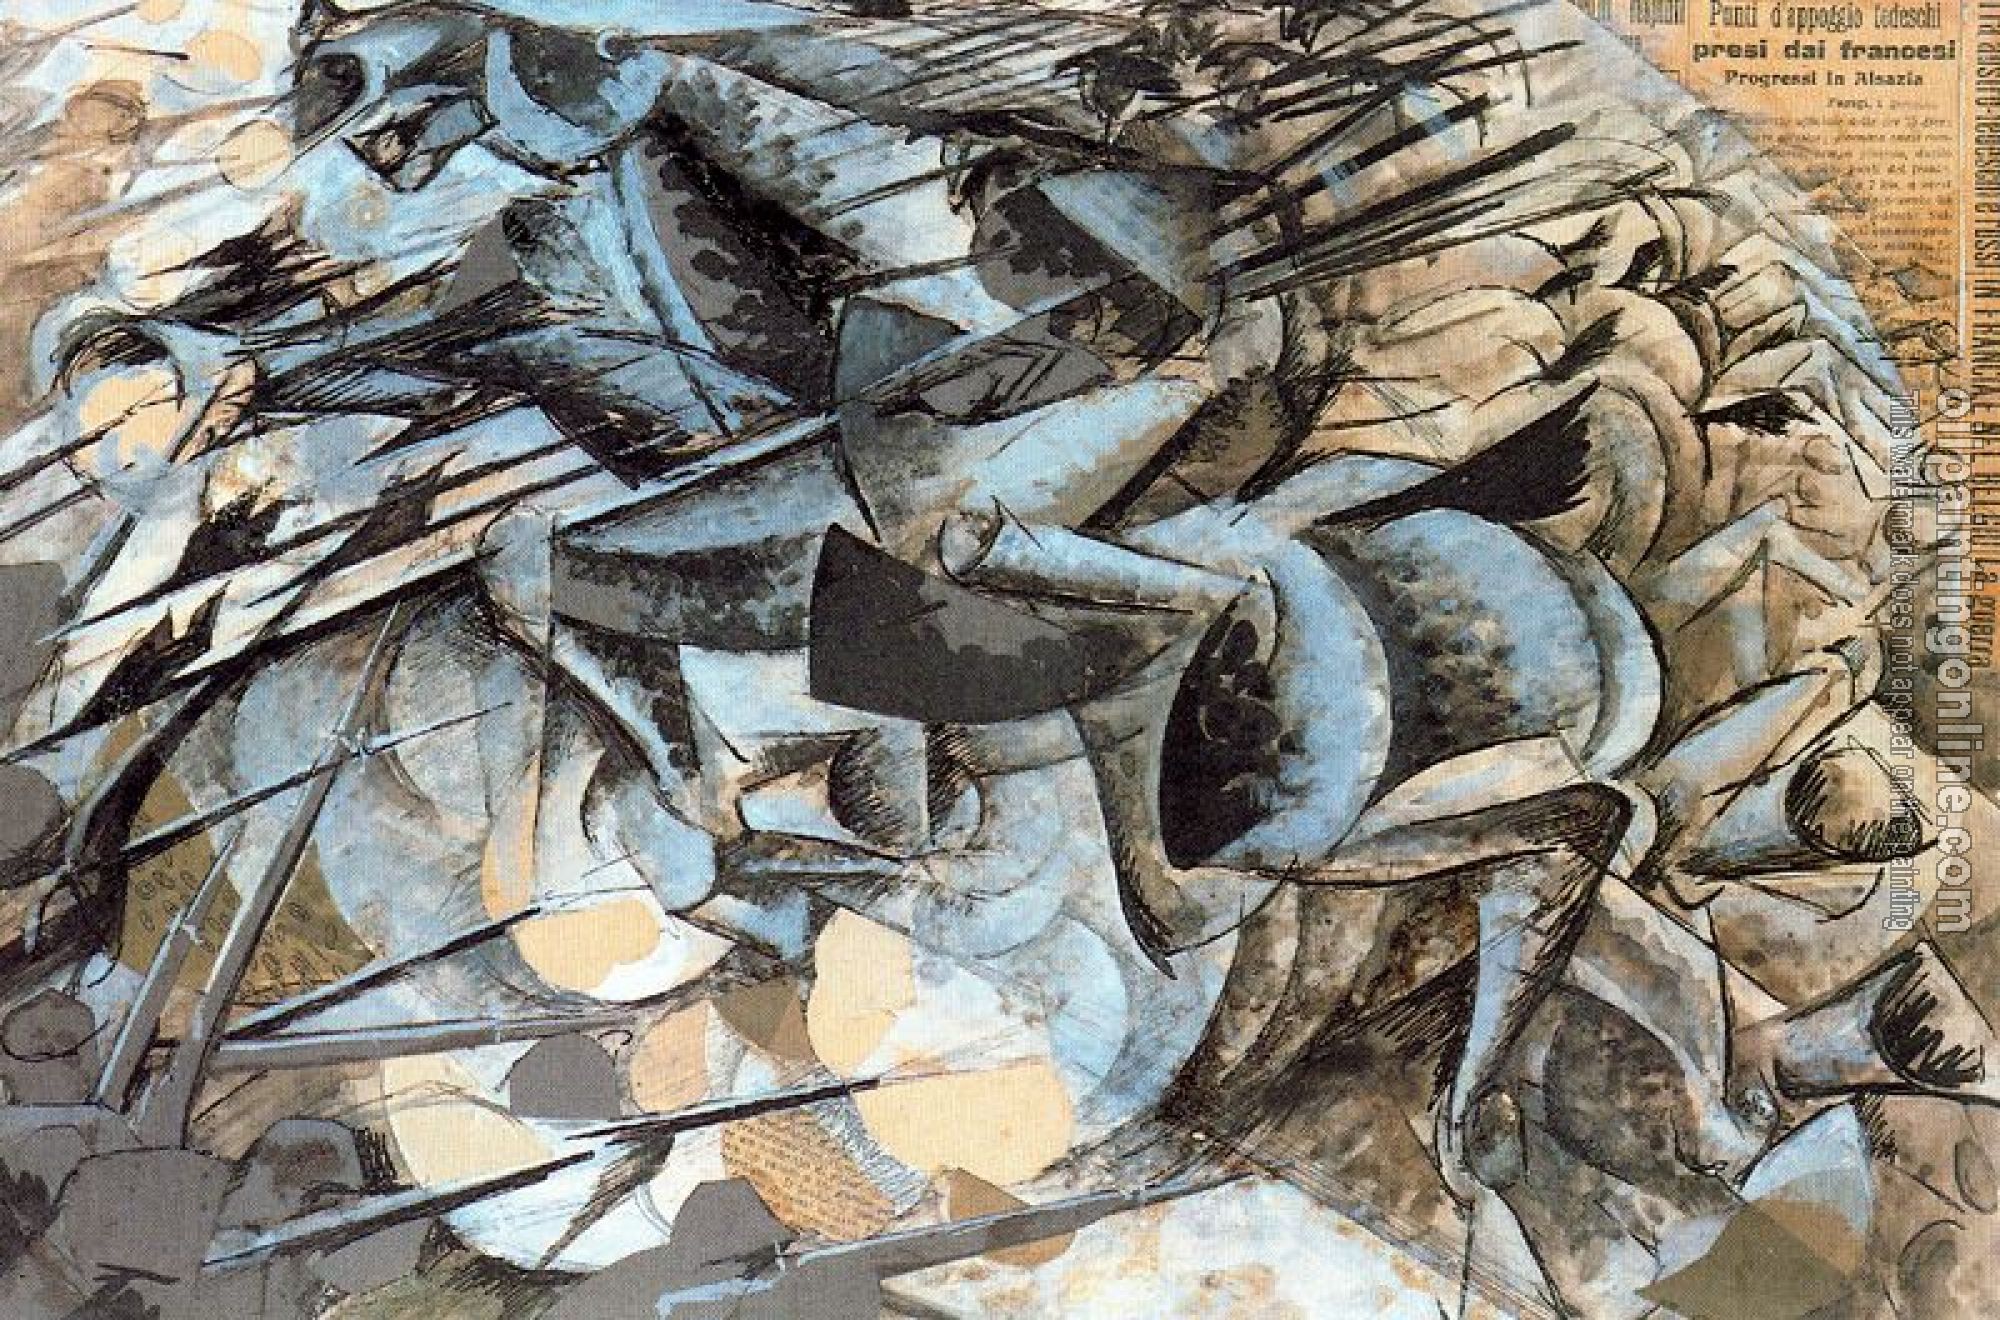 Umberto Boccioni - The Charge of the Lancers